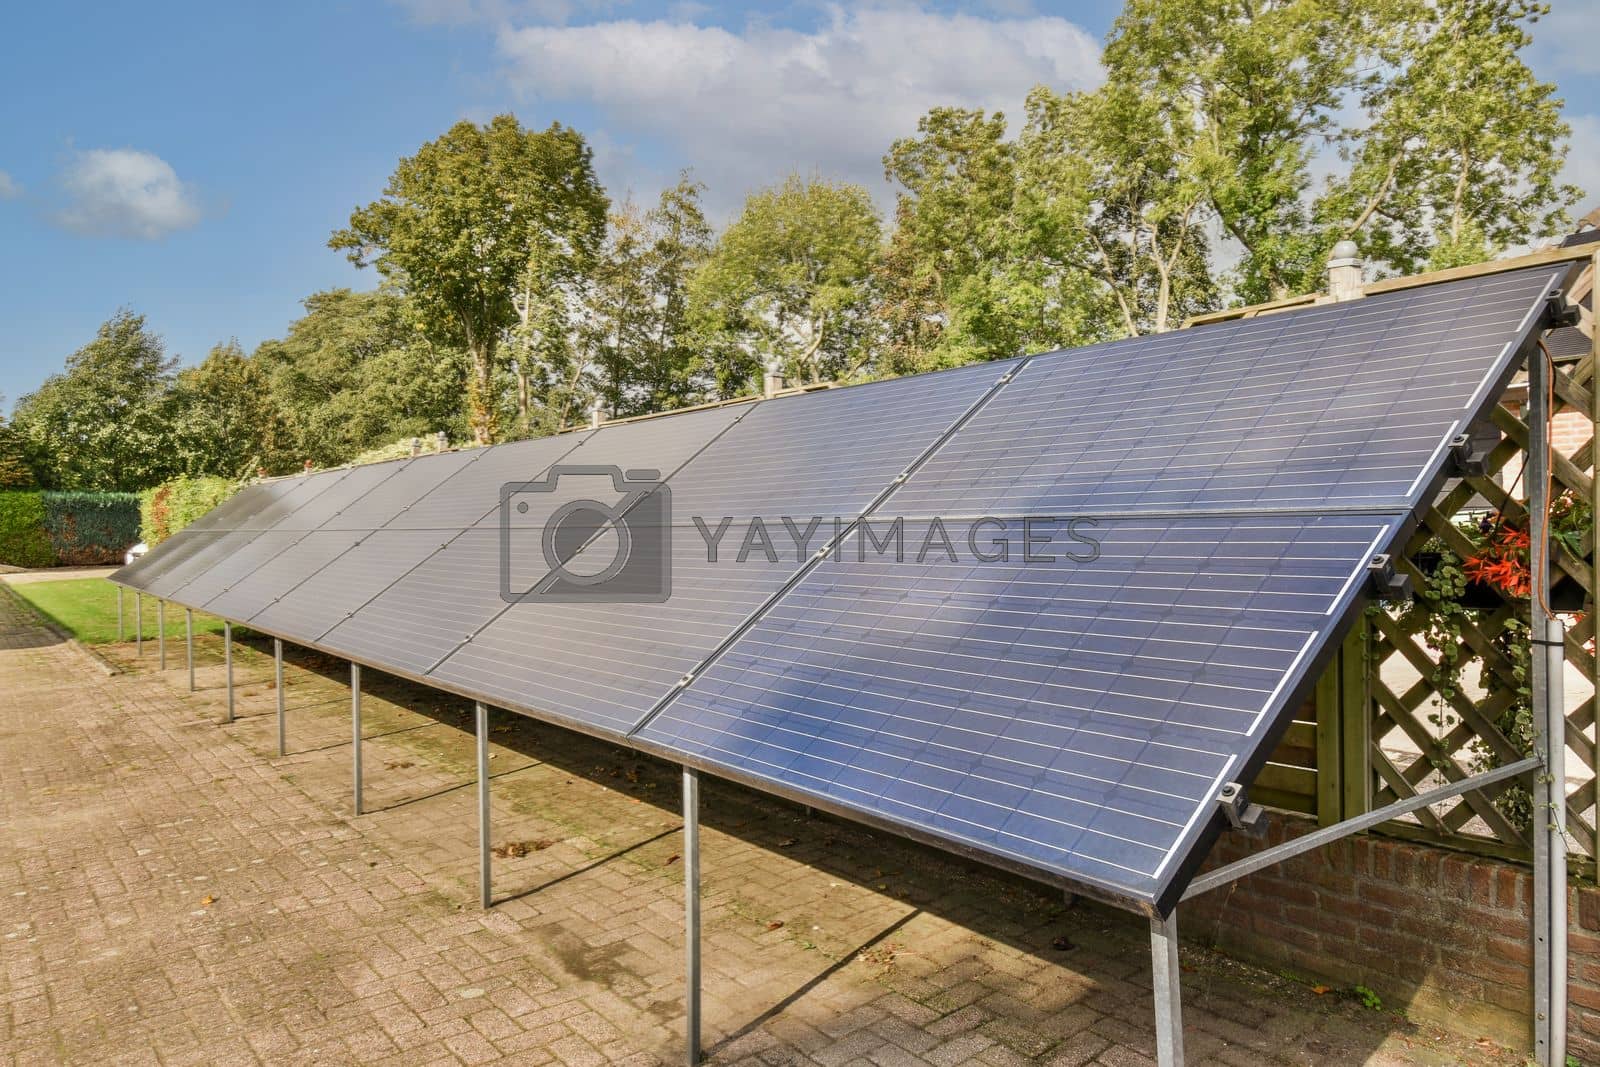 Royalty free image of the solar panels on the roof of a greenhouse by casamedia